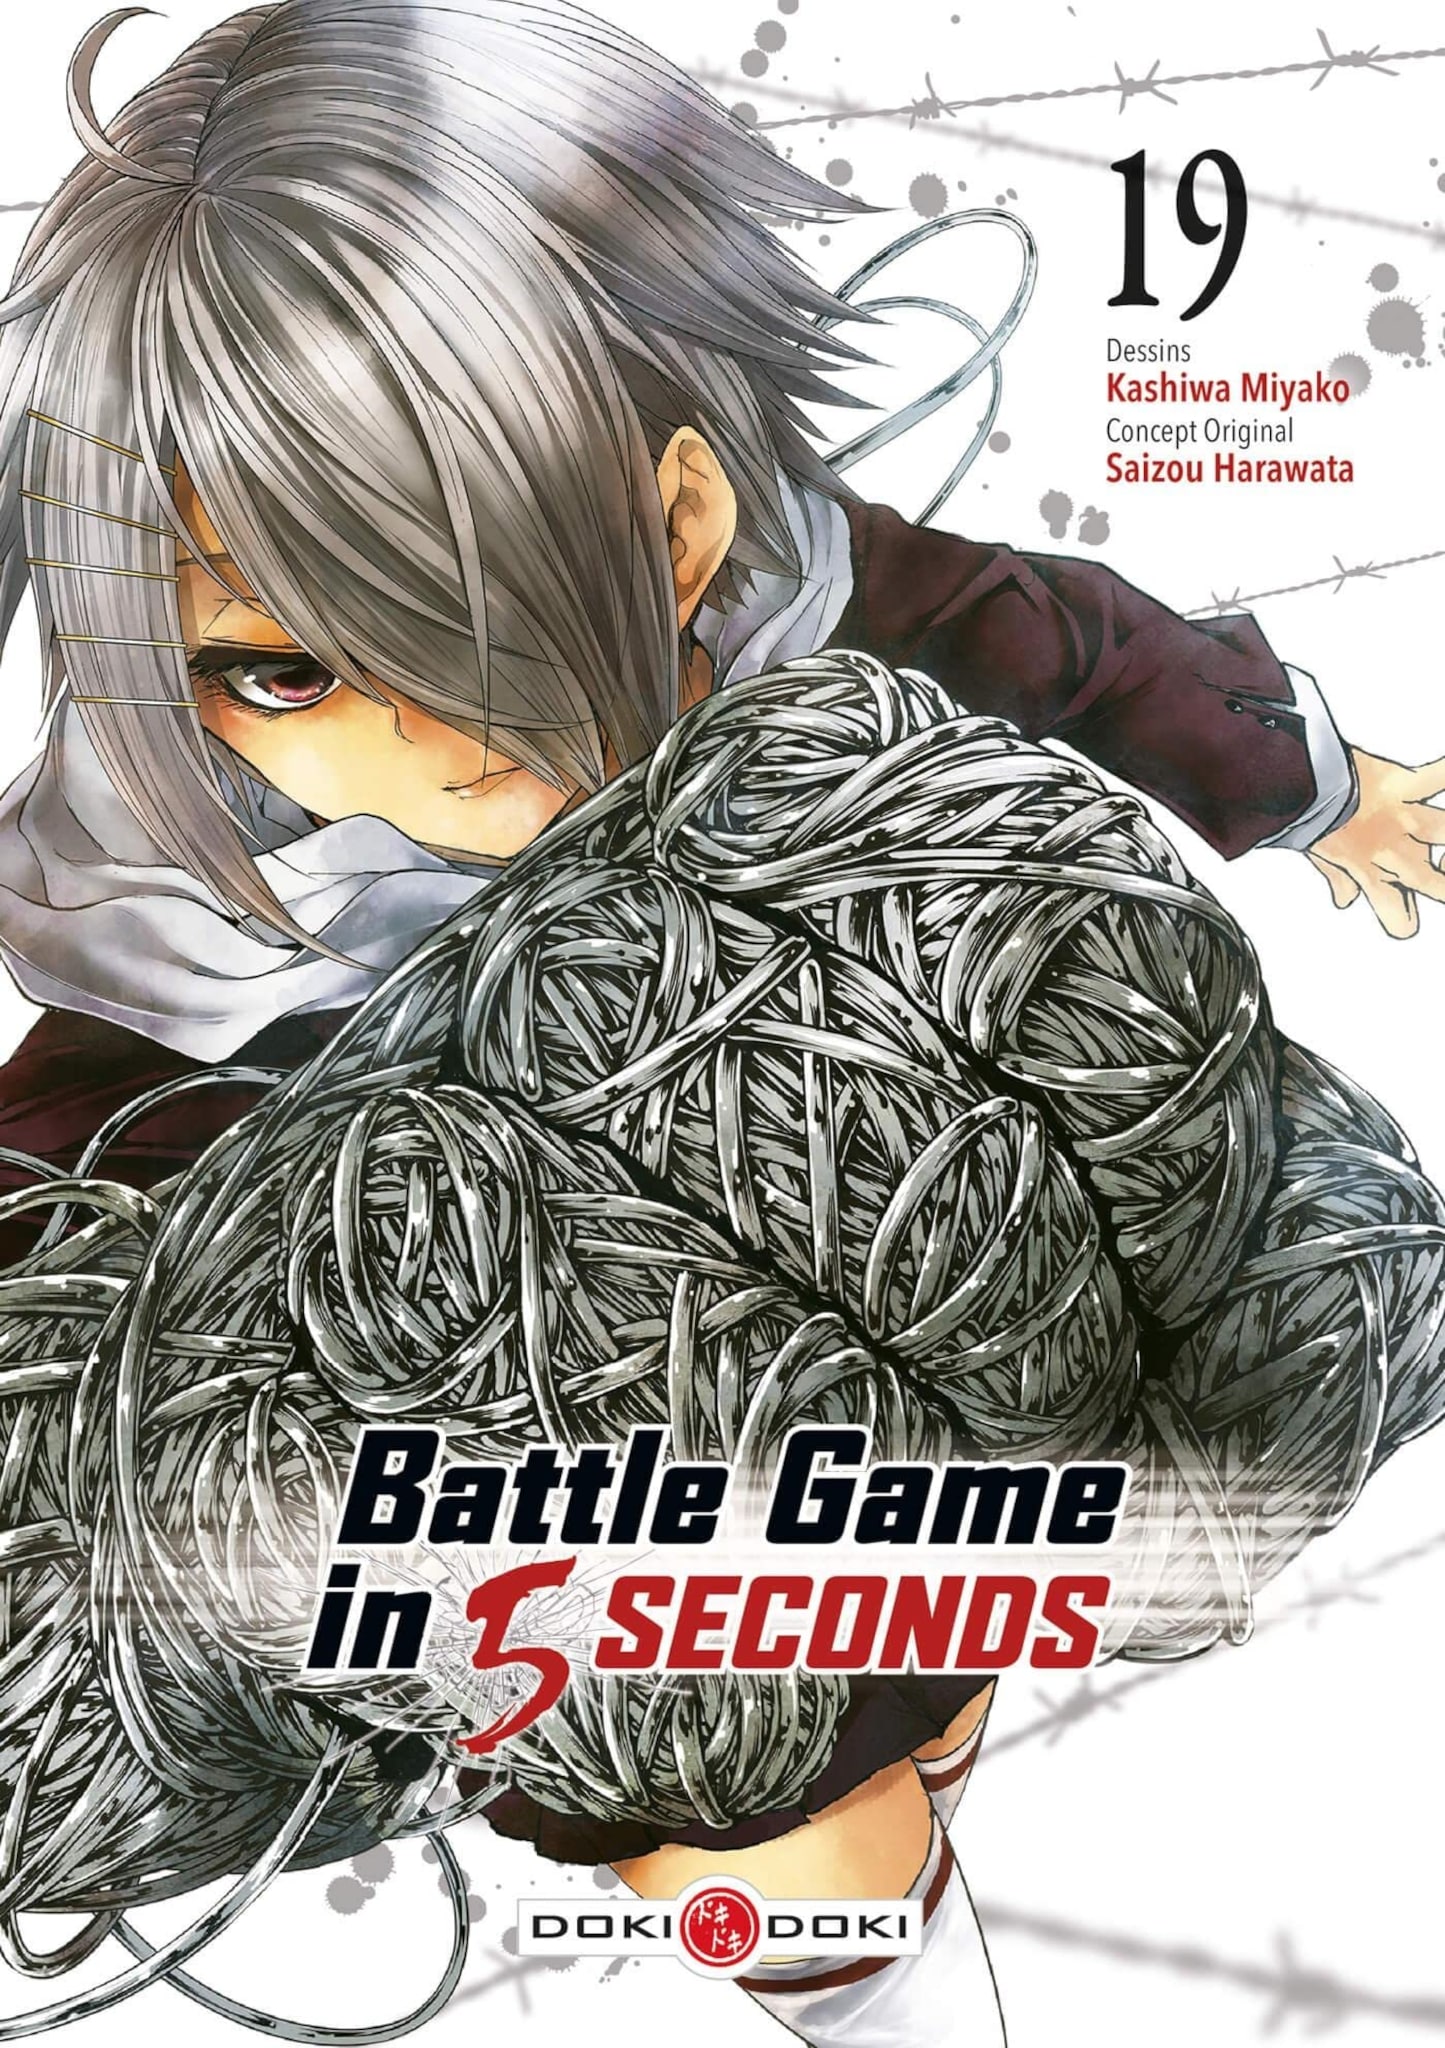 tome 19 du manga Battle Game in 5 Seconds